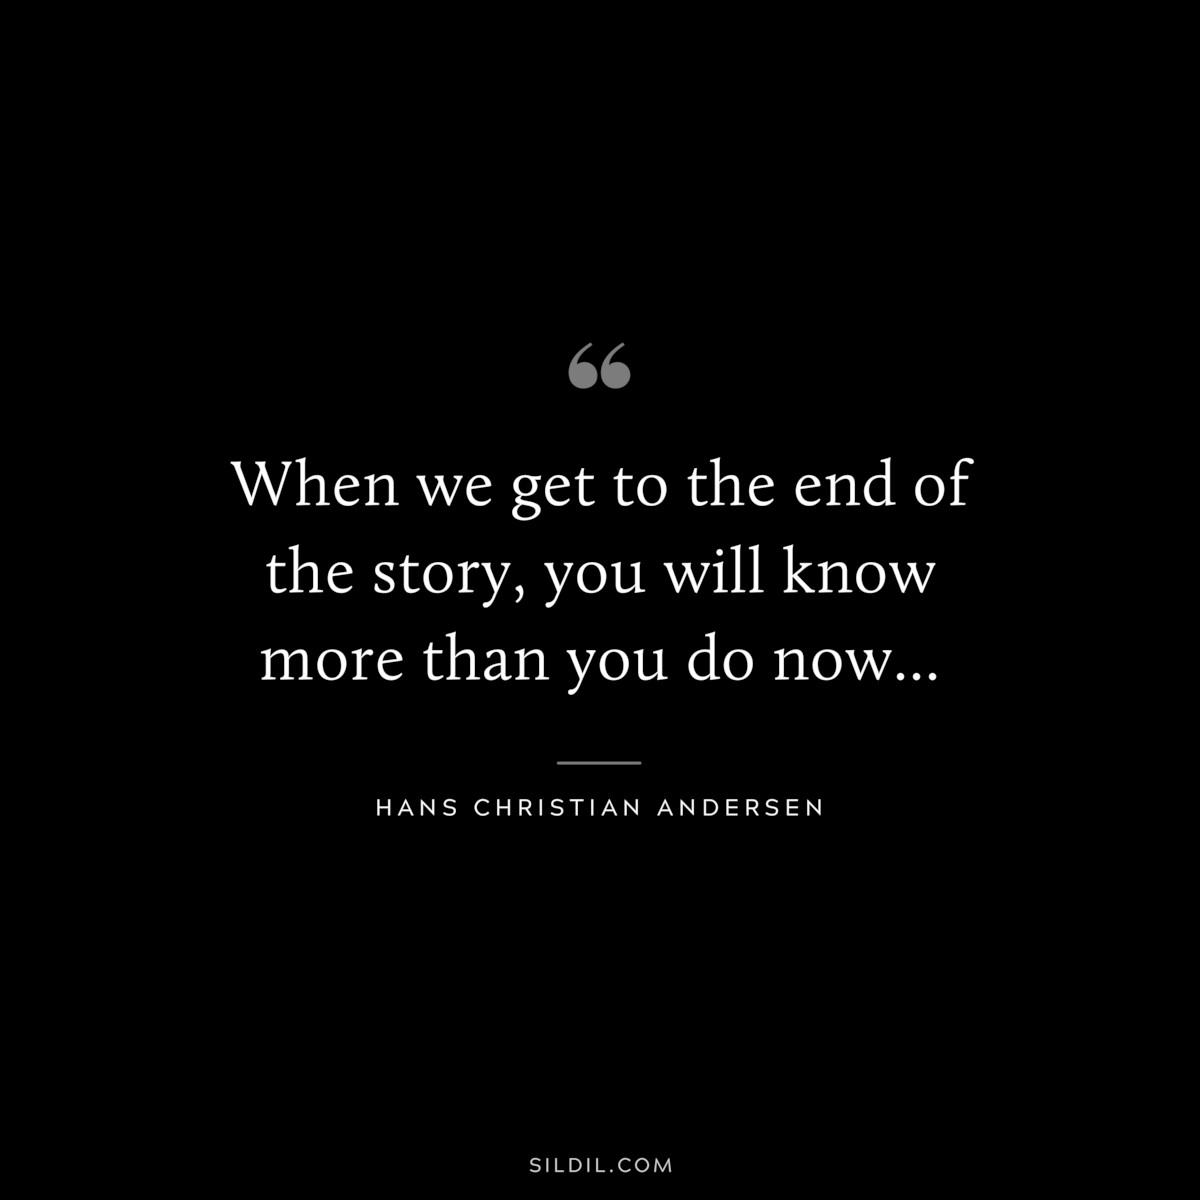 When we get to the end of the story, you will know more than you do now... ― Hans Christian Andersen